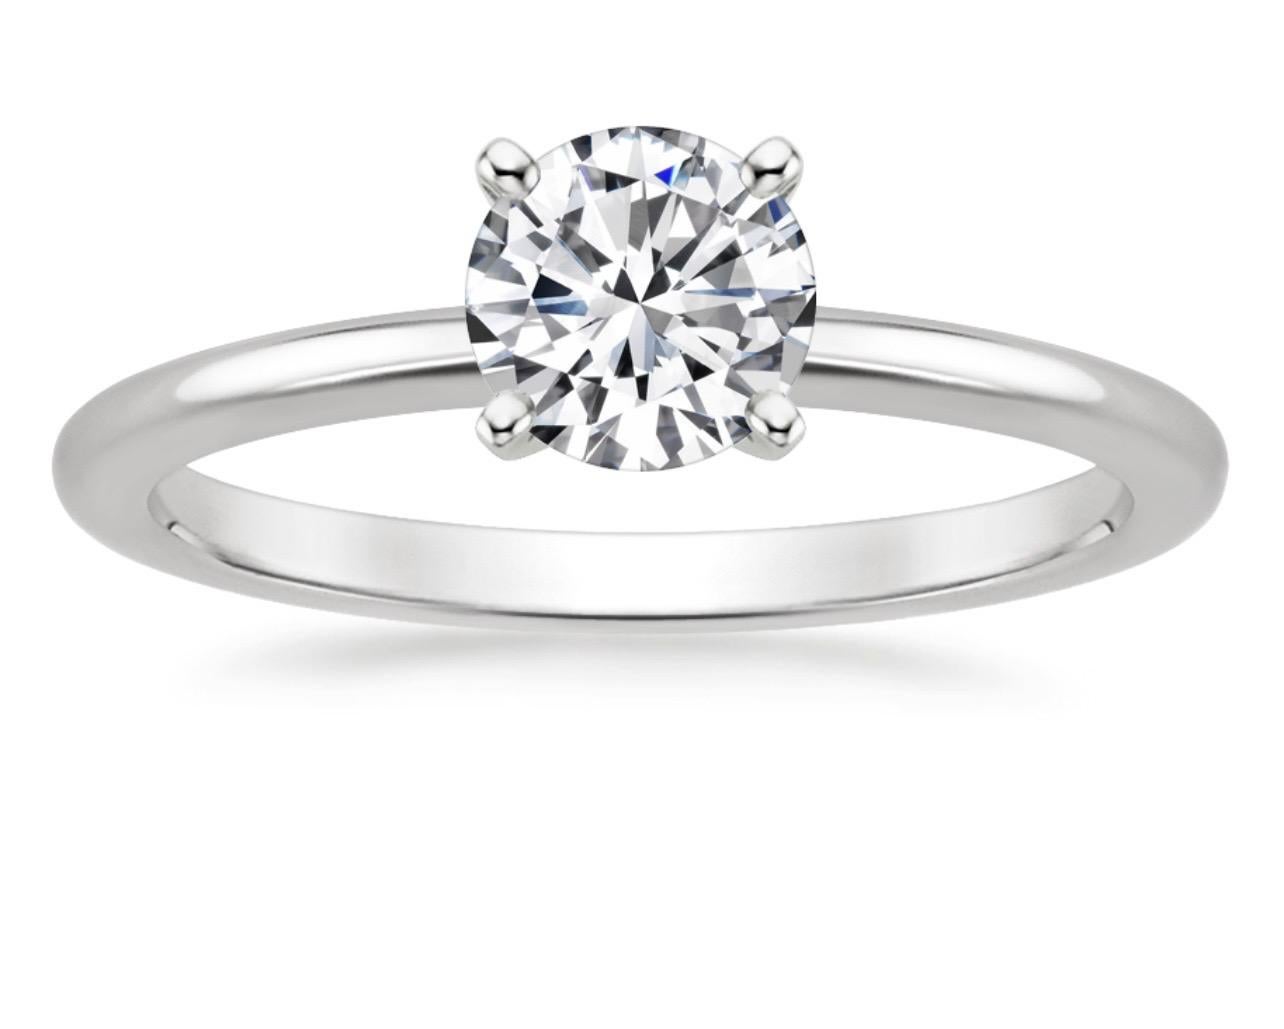 Approximately  1 Carat Diamond  Traditional Engagement Ring 14 Karat White Gold Size 7 & 1/2
6.2 mm round diamond 
Brilliant cut solitaire round diamond approximately 1 ct 
This is a Engagement Ring  from our affordable wedding collection. Please